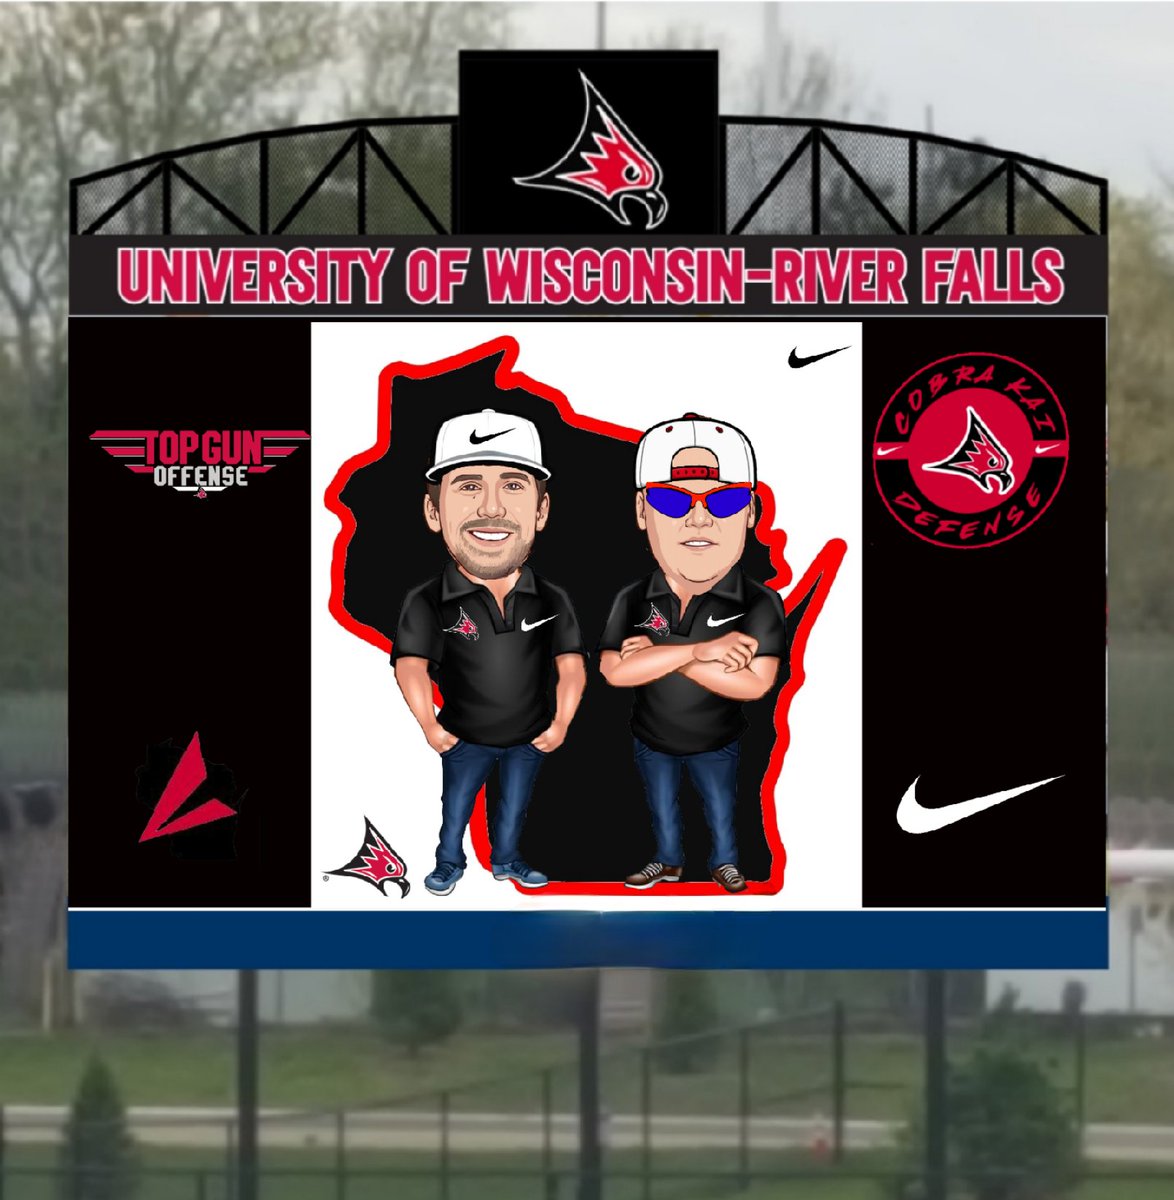 It's Game Week and I know these 2 are ready. @CoachJMath @coach_Wiss will have the Falcons ready to go on both sides of the ball. #topgunoffense #cobrakai @UWRFFootball @CoachWalkerRF